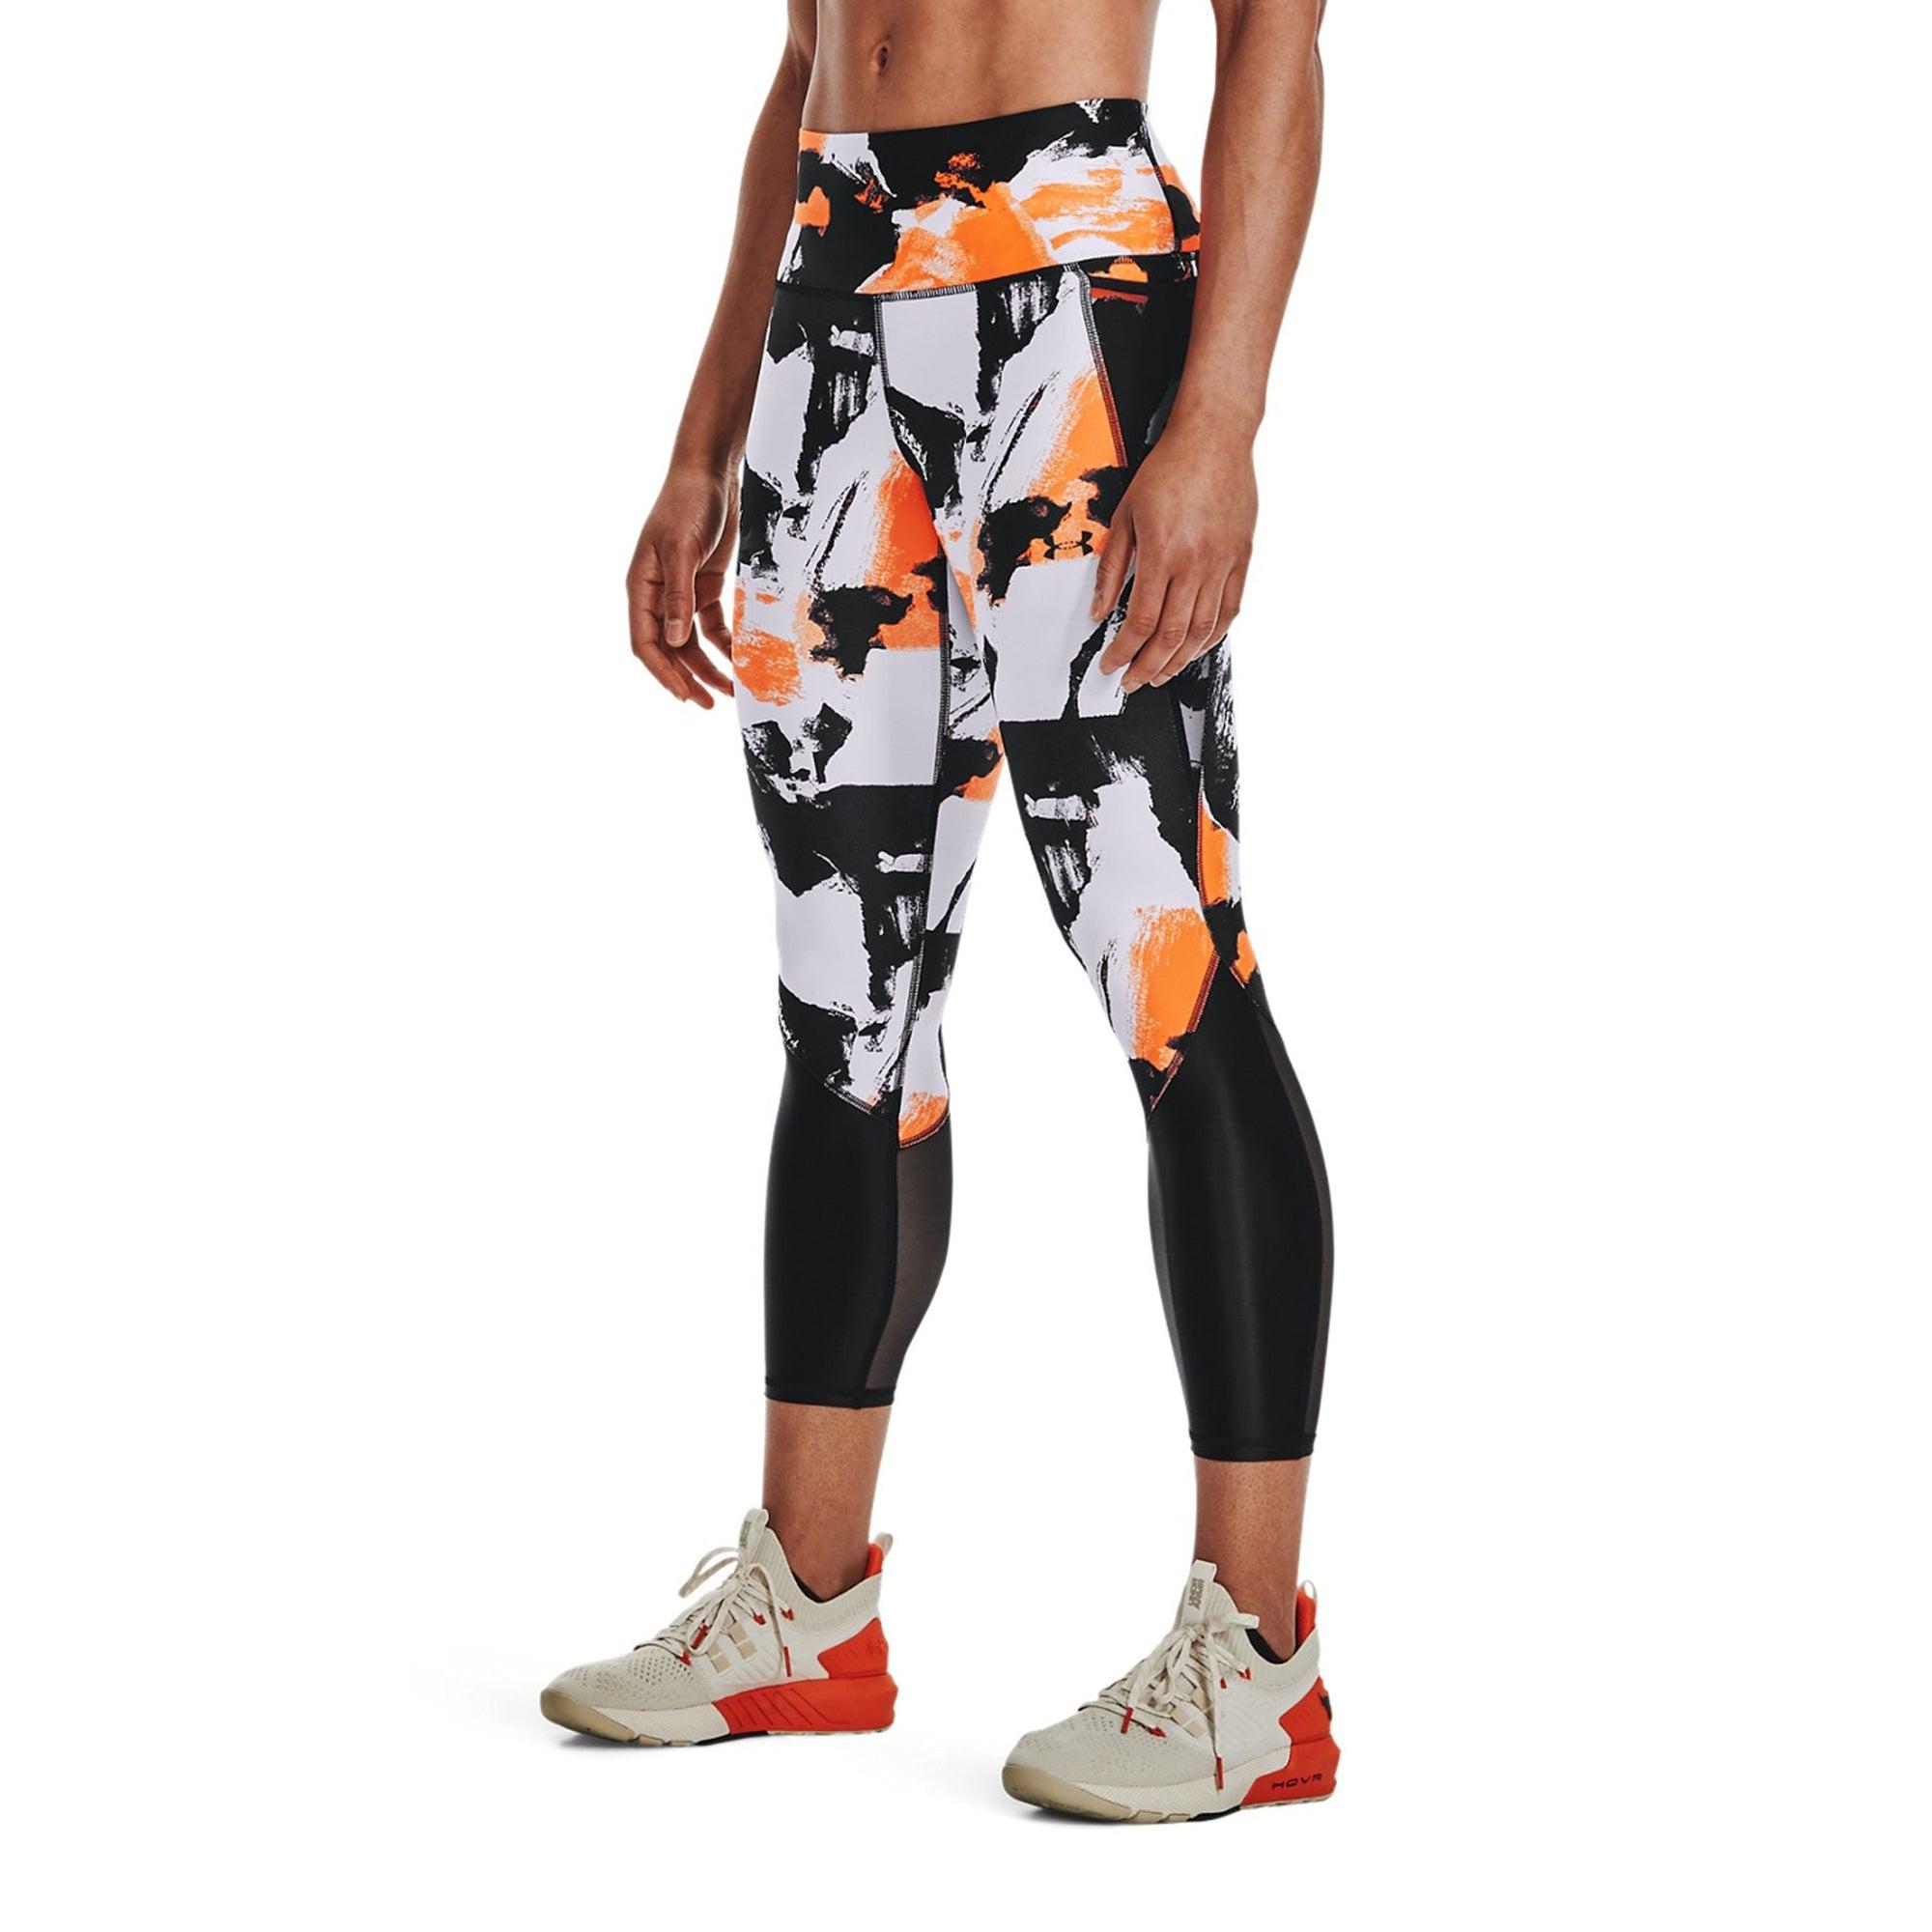 Quần legging thể thao nữ Under Armour Project Rock 7/8 - 1363519-001